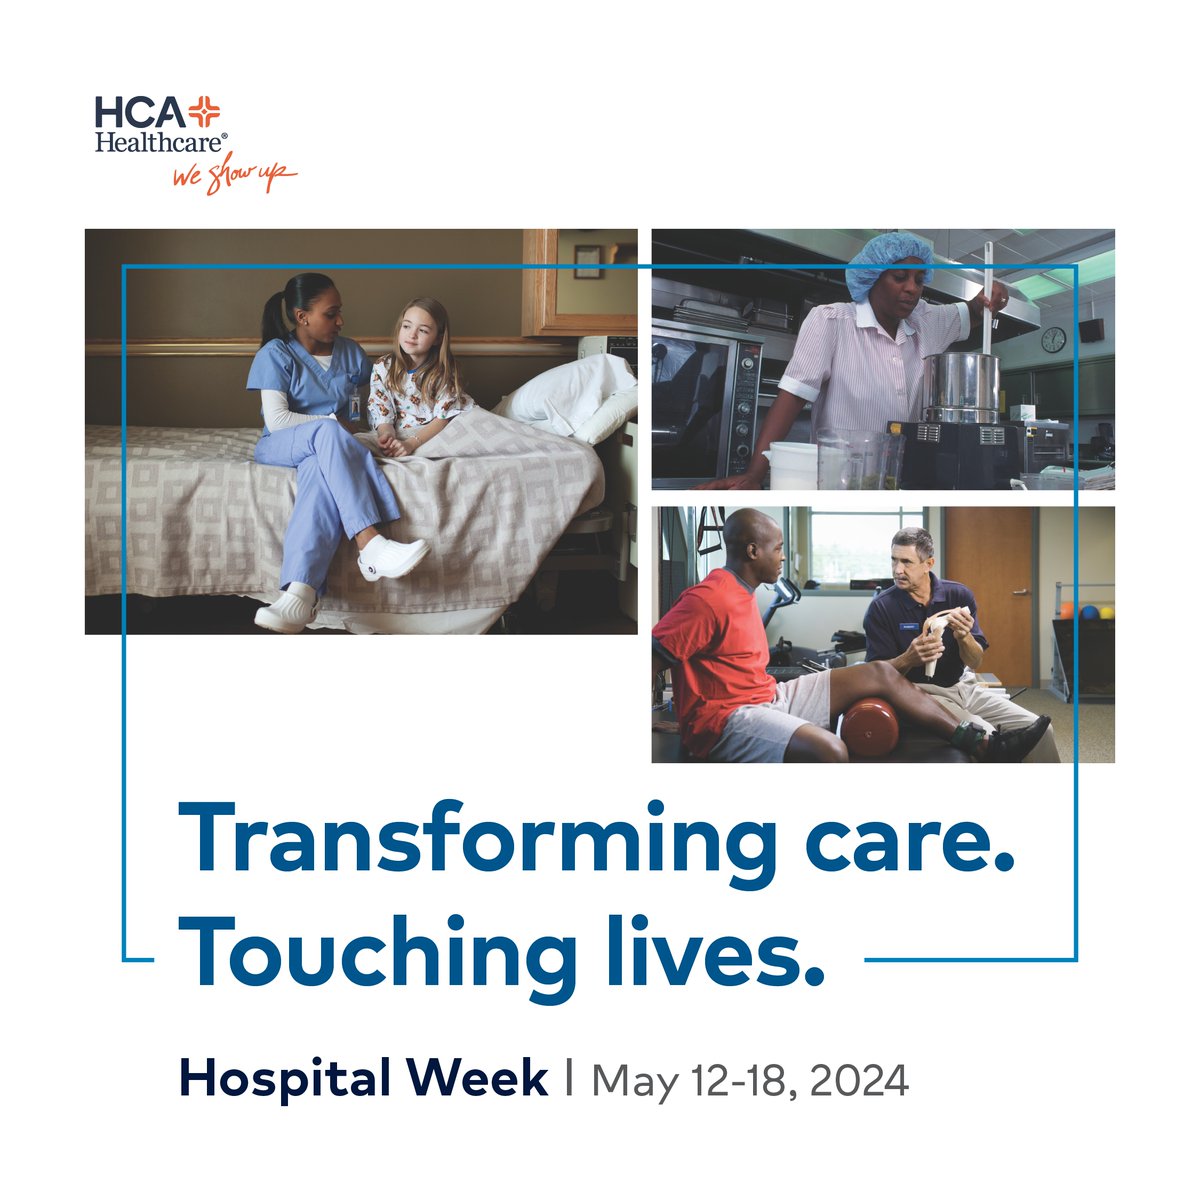 During National #HospitalWeek, HealthONE is proud to join our larger @HCAHealthcare network to honor each colleague who makes a positive impact in the lives of our patients and community members each day. Thank you for transforming care and touching lives.